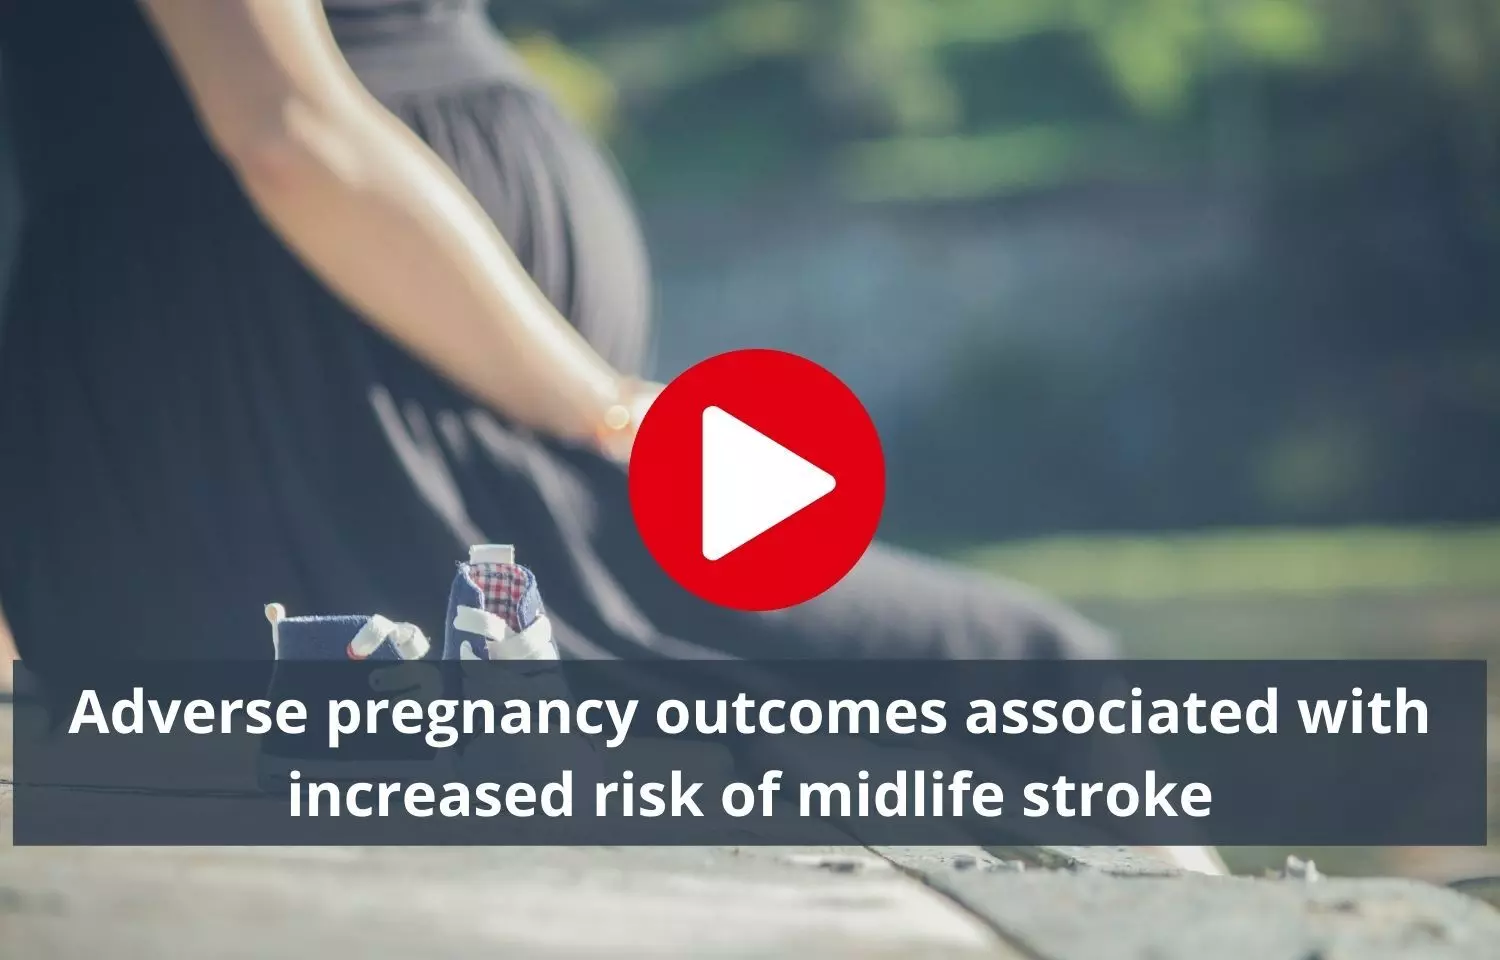 Midlife stroke risk tied to adverse pregnancy outcomes